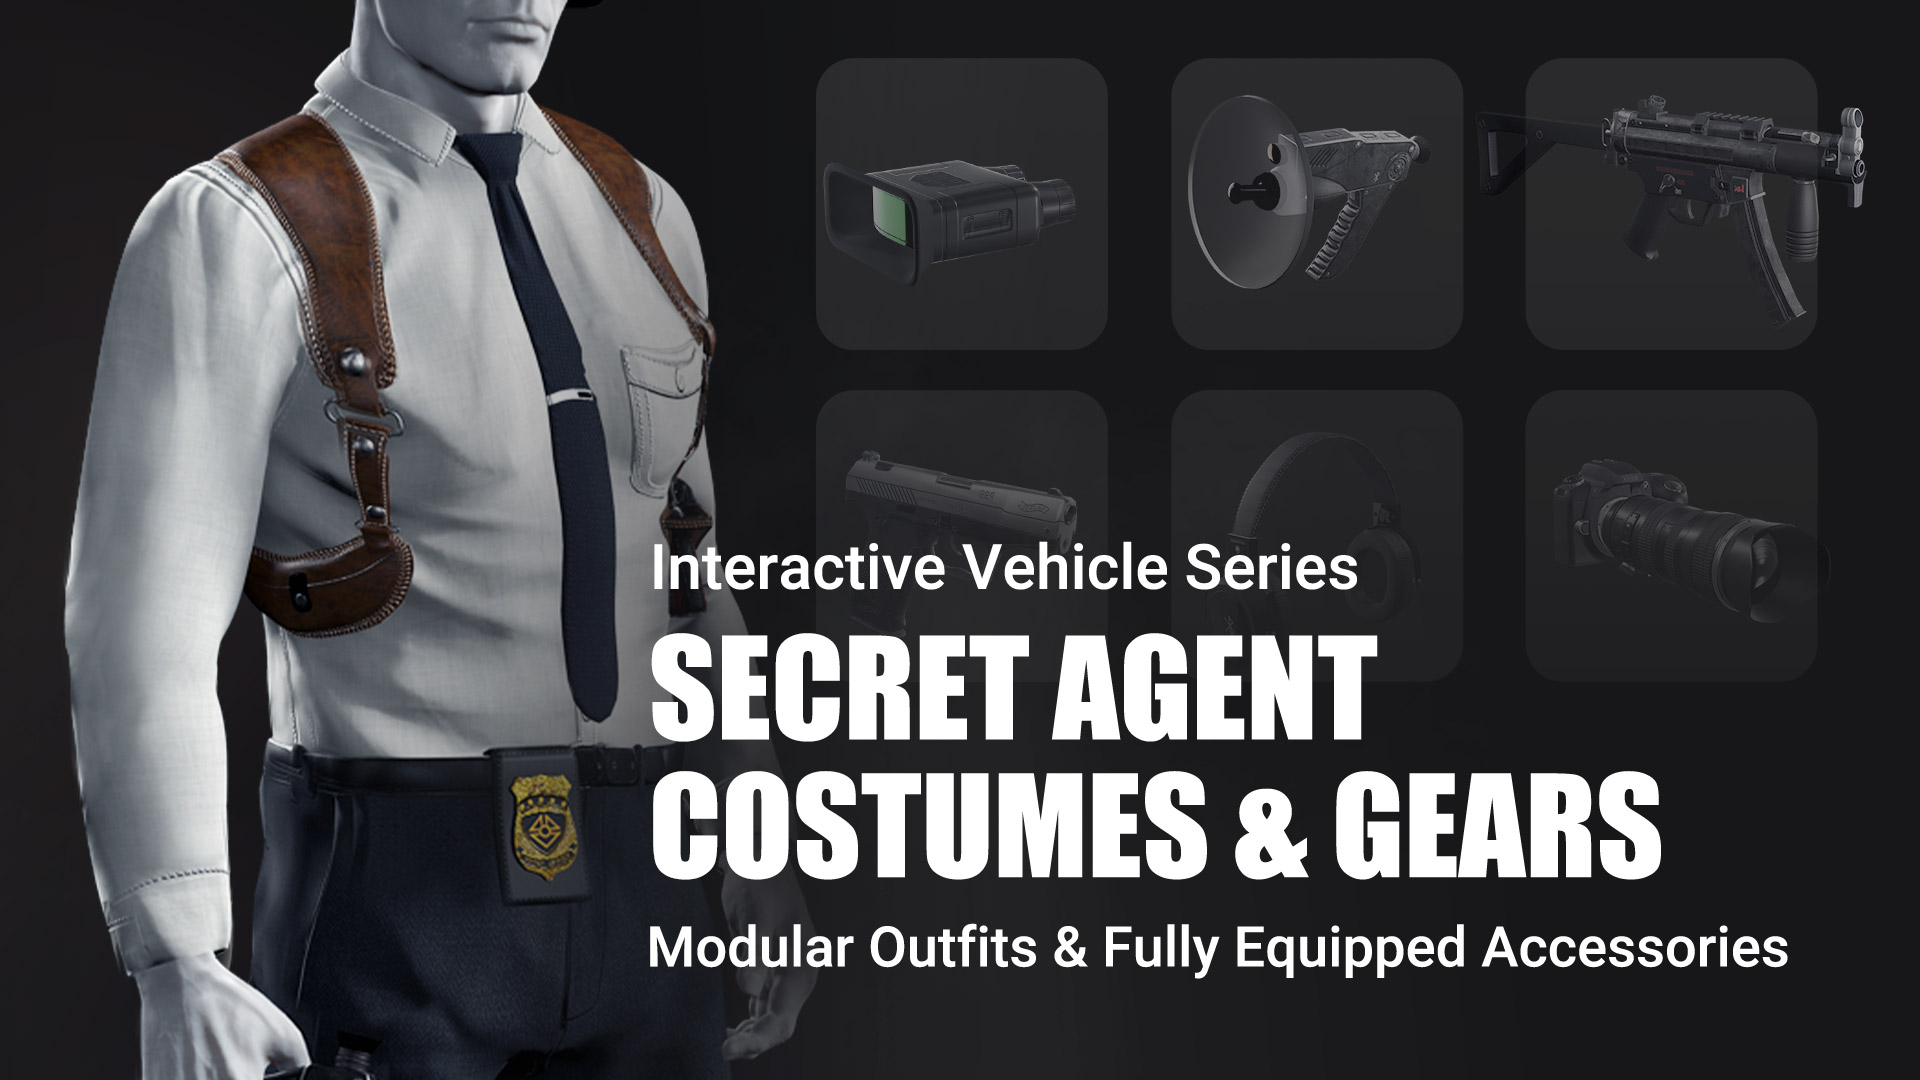 Secret Agent Costumes & Gears - Character Creator/Combo (Single PID) - Reallusion Content Store